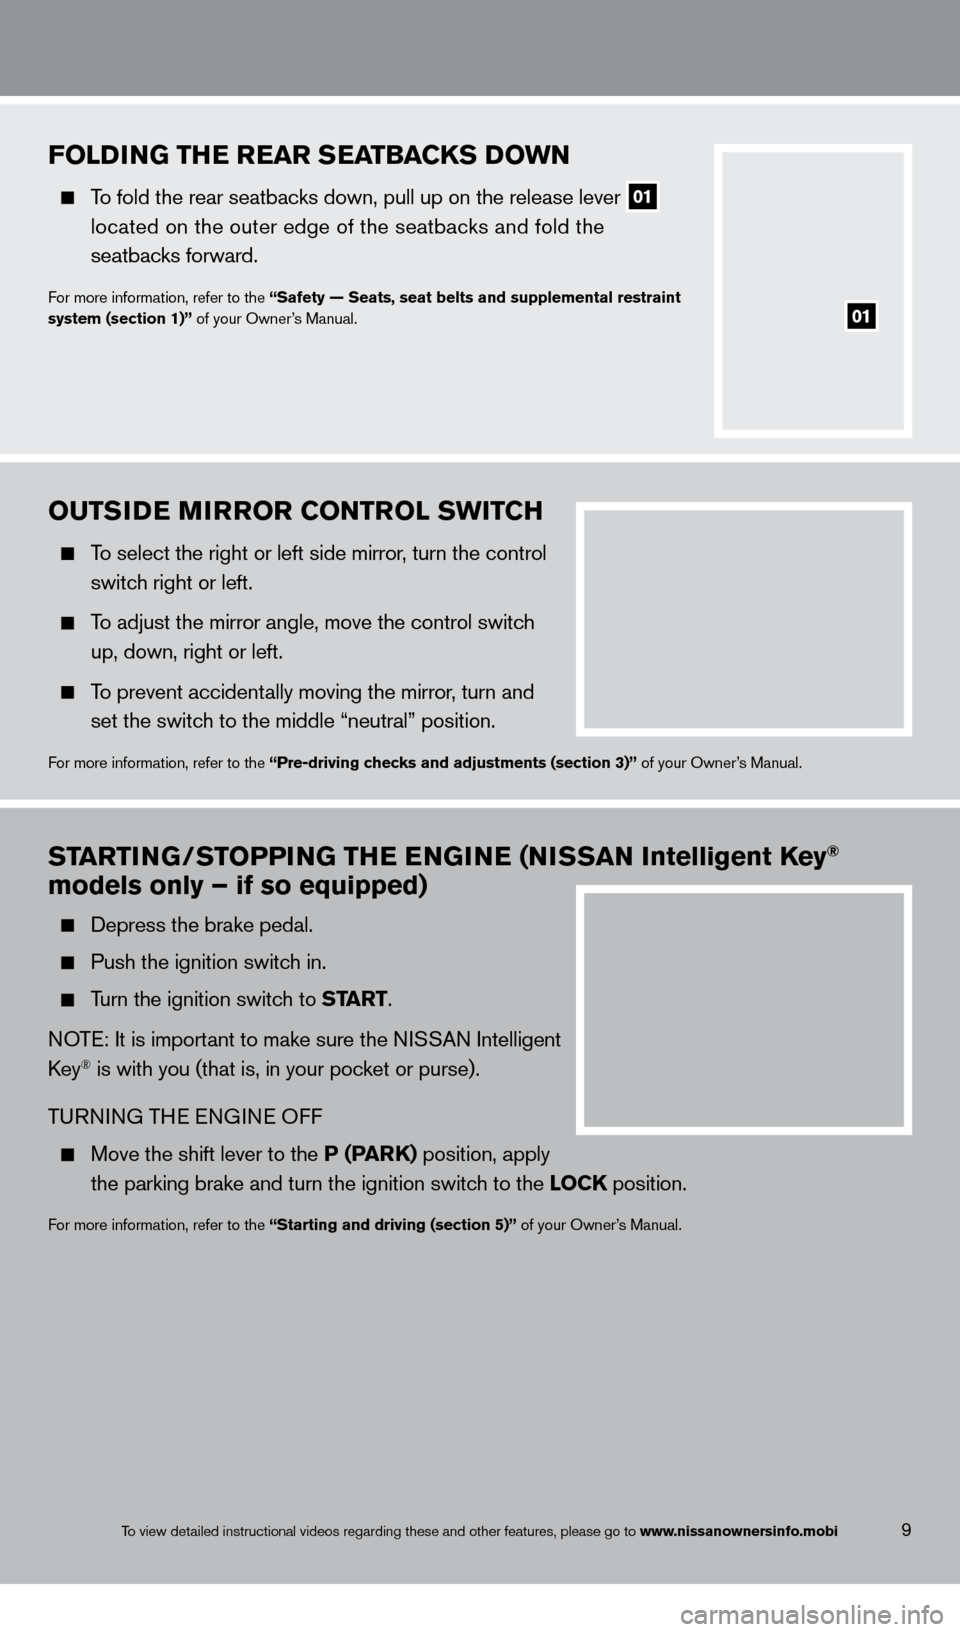 NISSAN ROGUE 2013 2.G Quick Reference Guide ouTSiDe Mi rror  C o NT rol  S wi TCH
  To select the right or left side mirror, turn the control 
  switc

h right or left.
  To adjust the mirror angle, move the control switch
 

 
up, down, right 